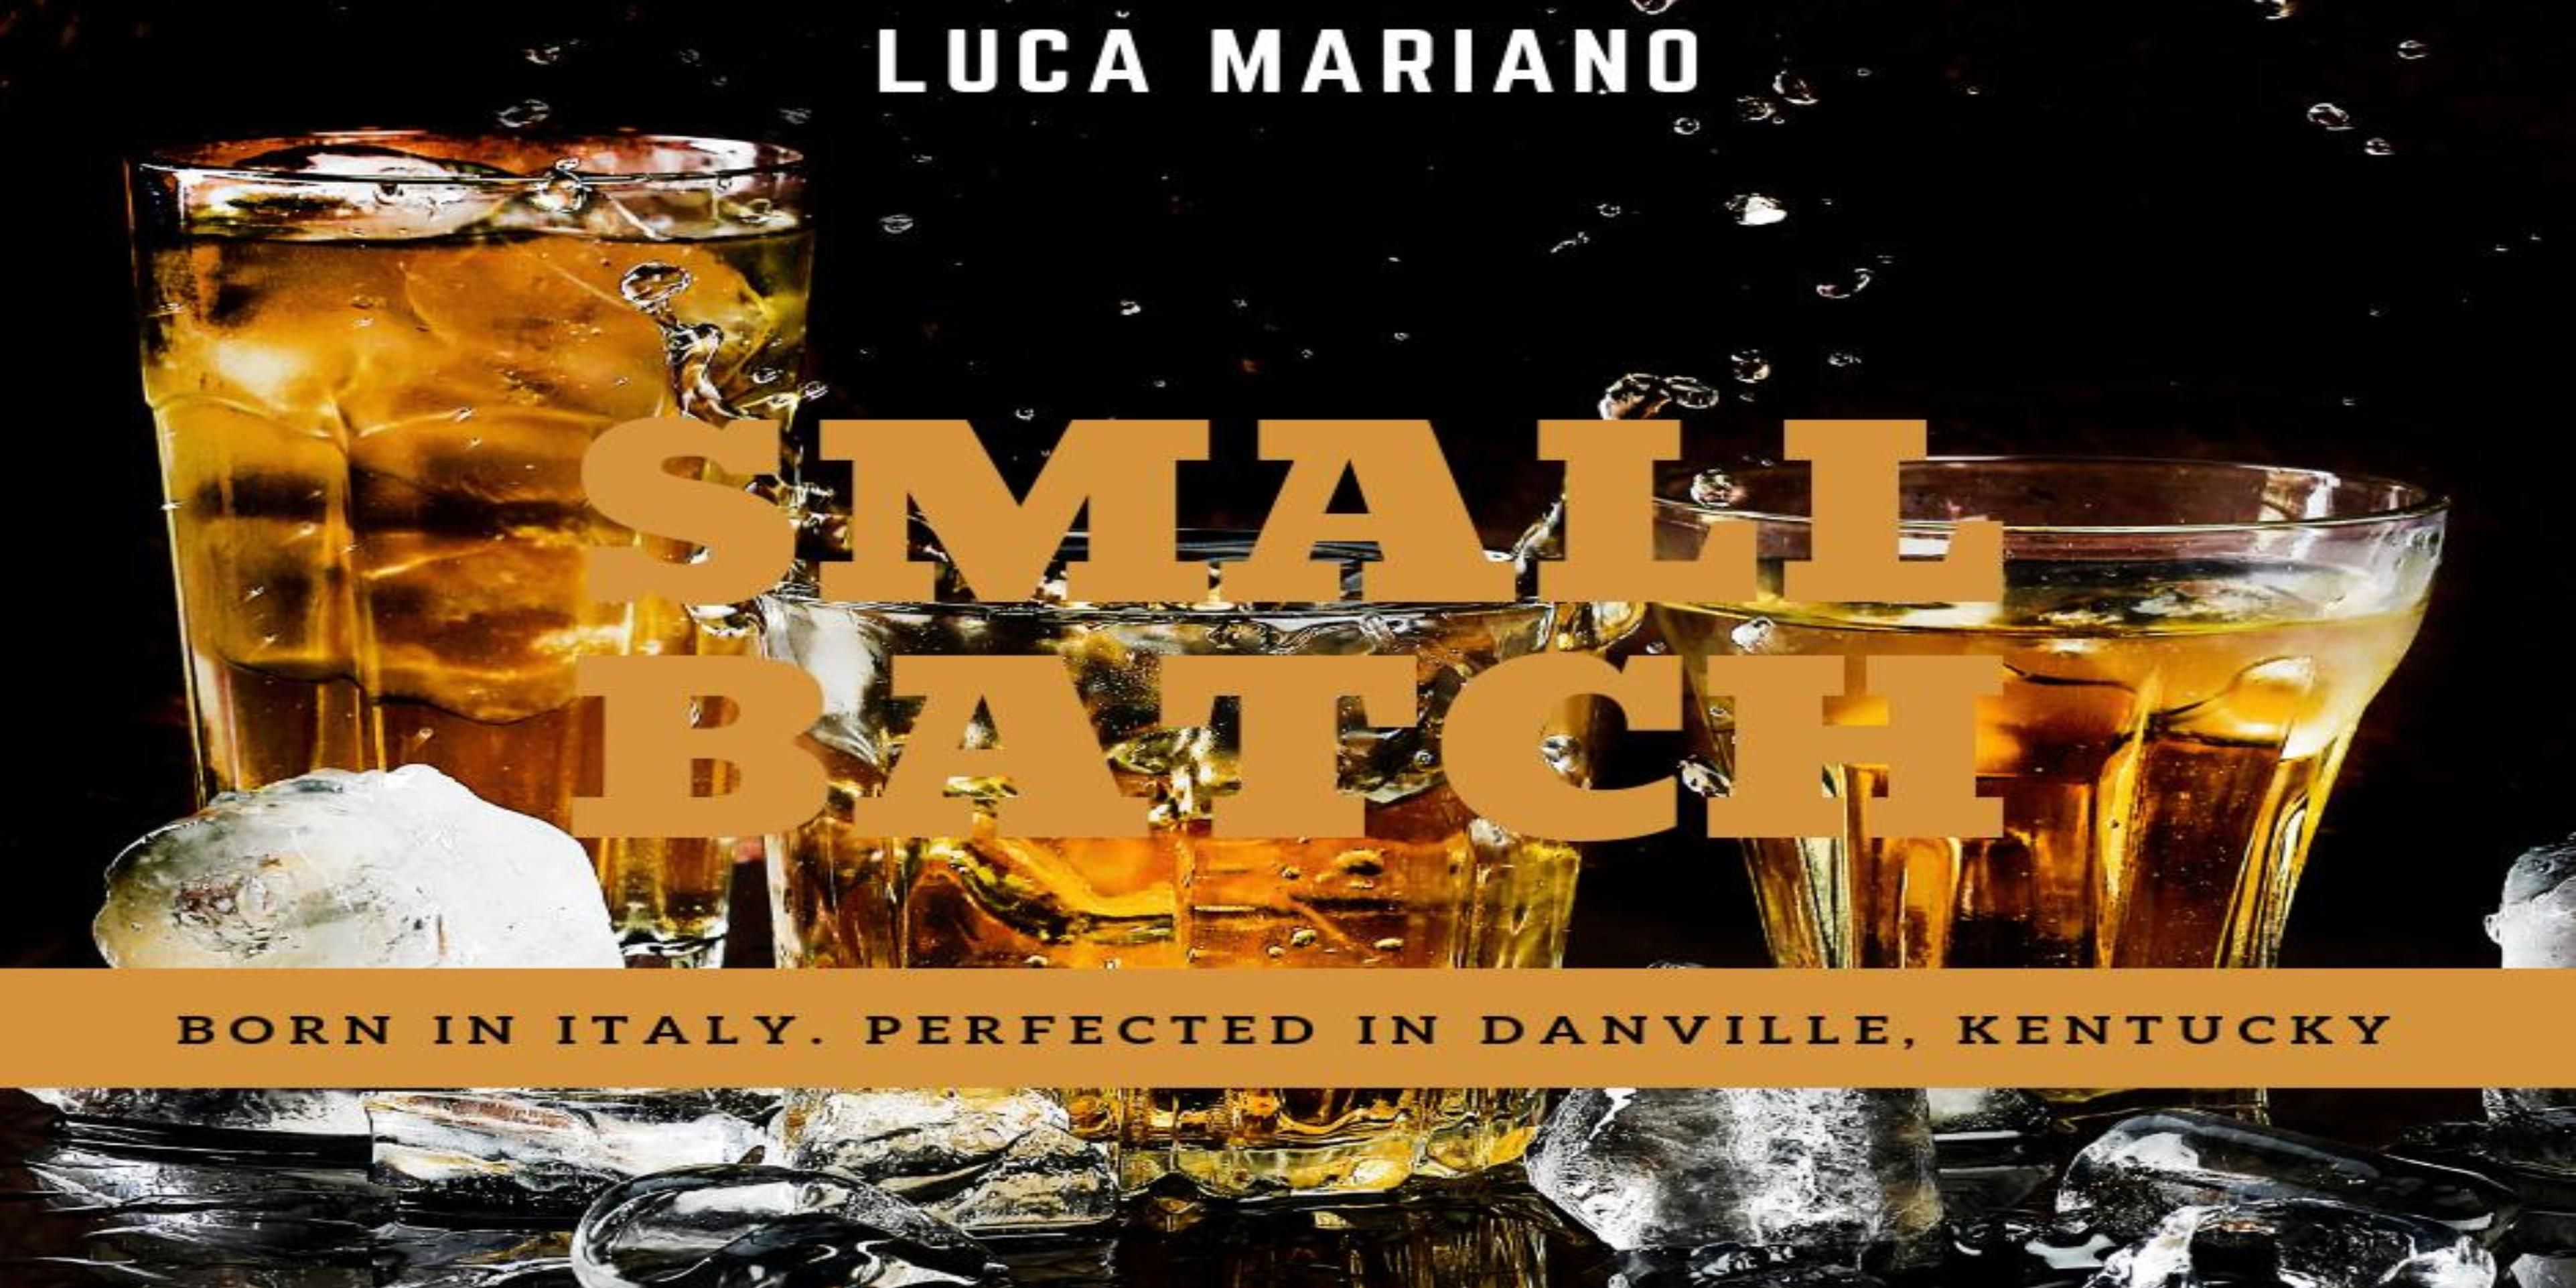 Italian Bourbon perfected in Danville, KY. Originating in Italy over 100 years ago and brought to Danville in 2018 to bring Kentucky Straight Bourbon and Rye Whiskey. Visit them here in Danville, KY for a tasting and tour. They will look forward to having you visit!